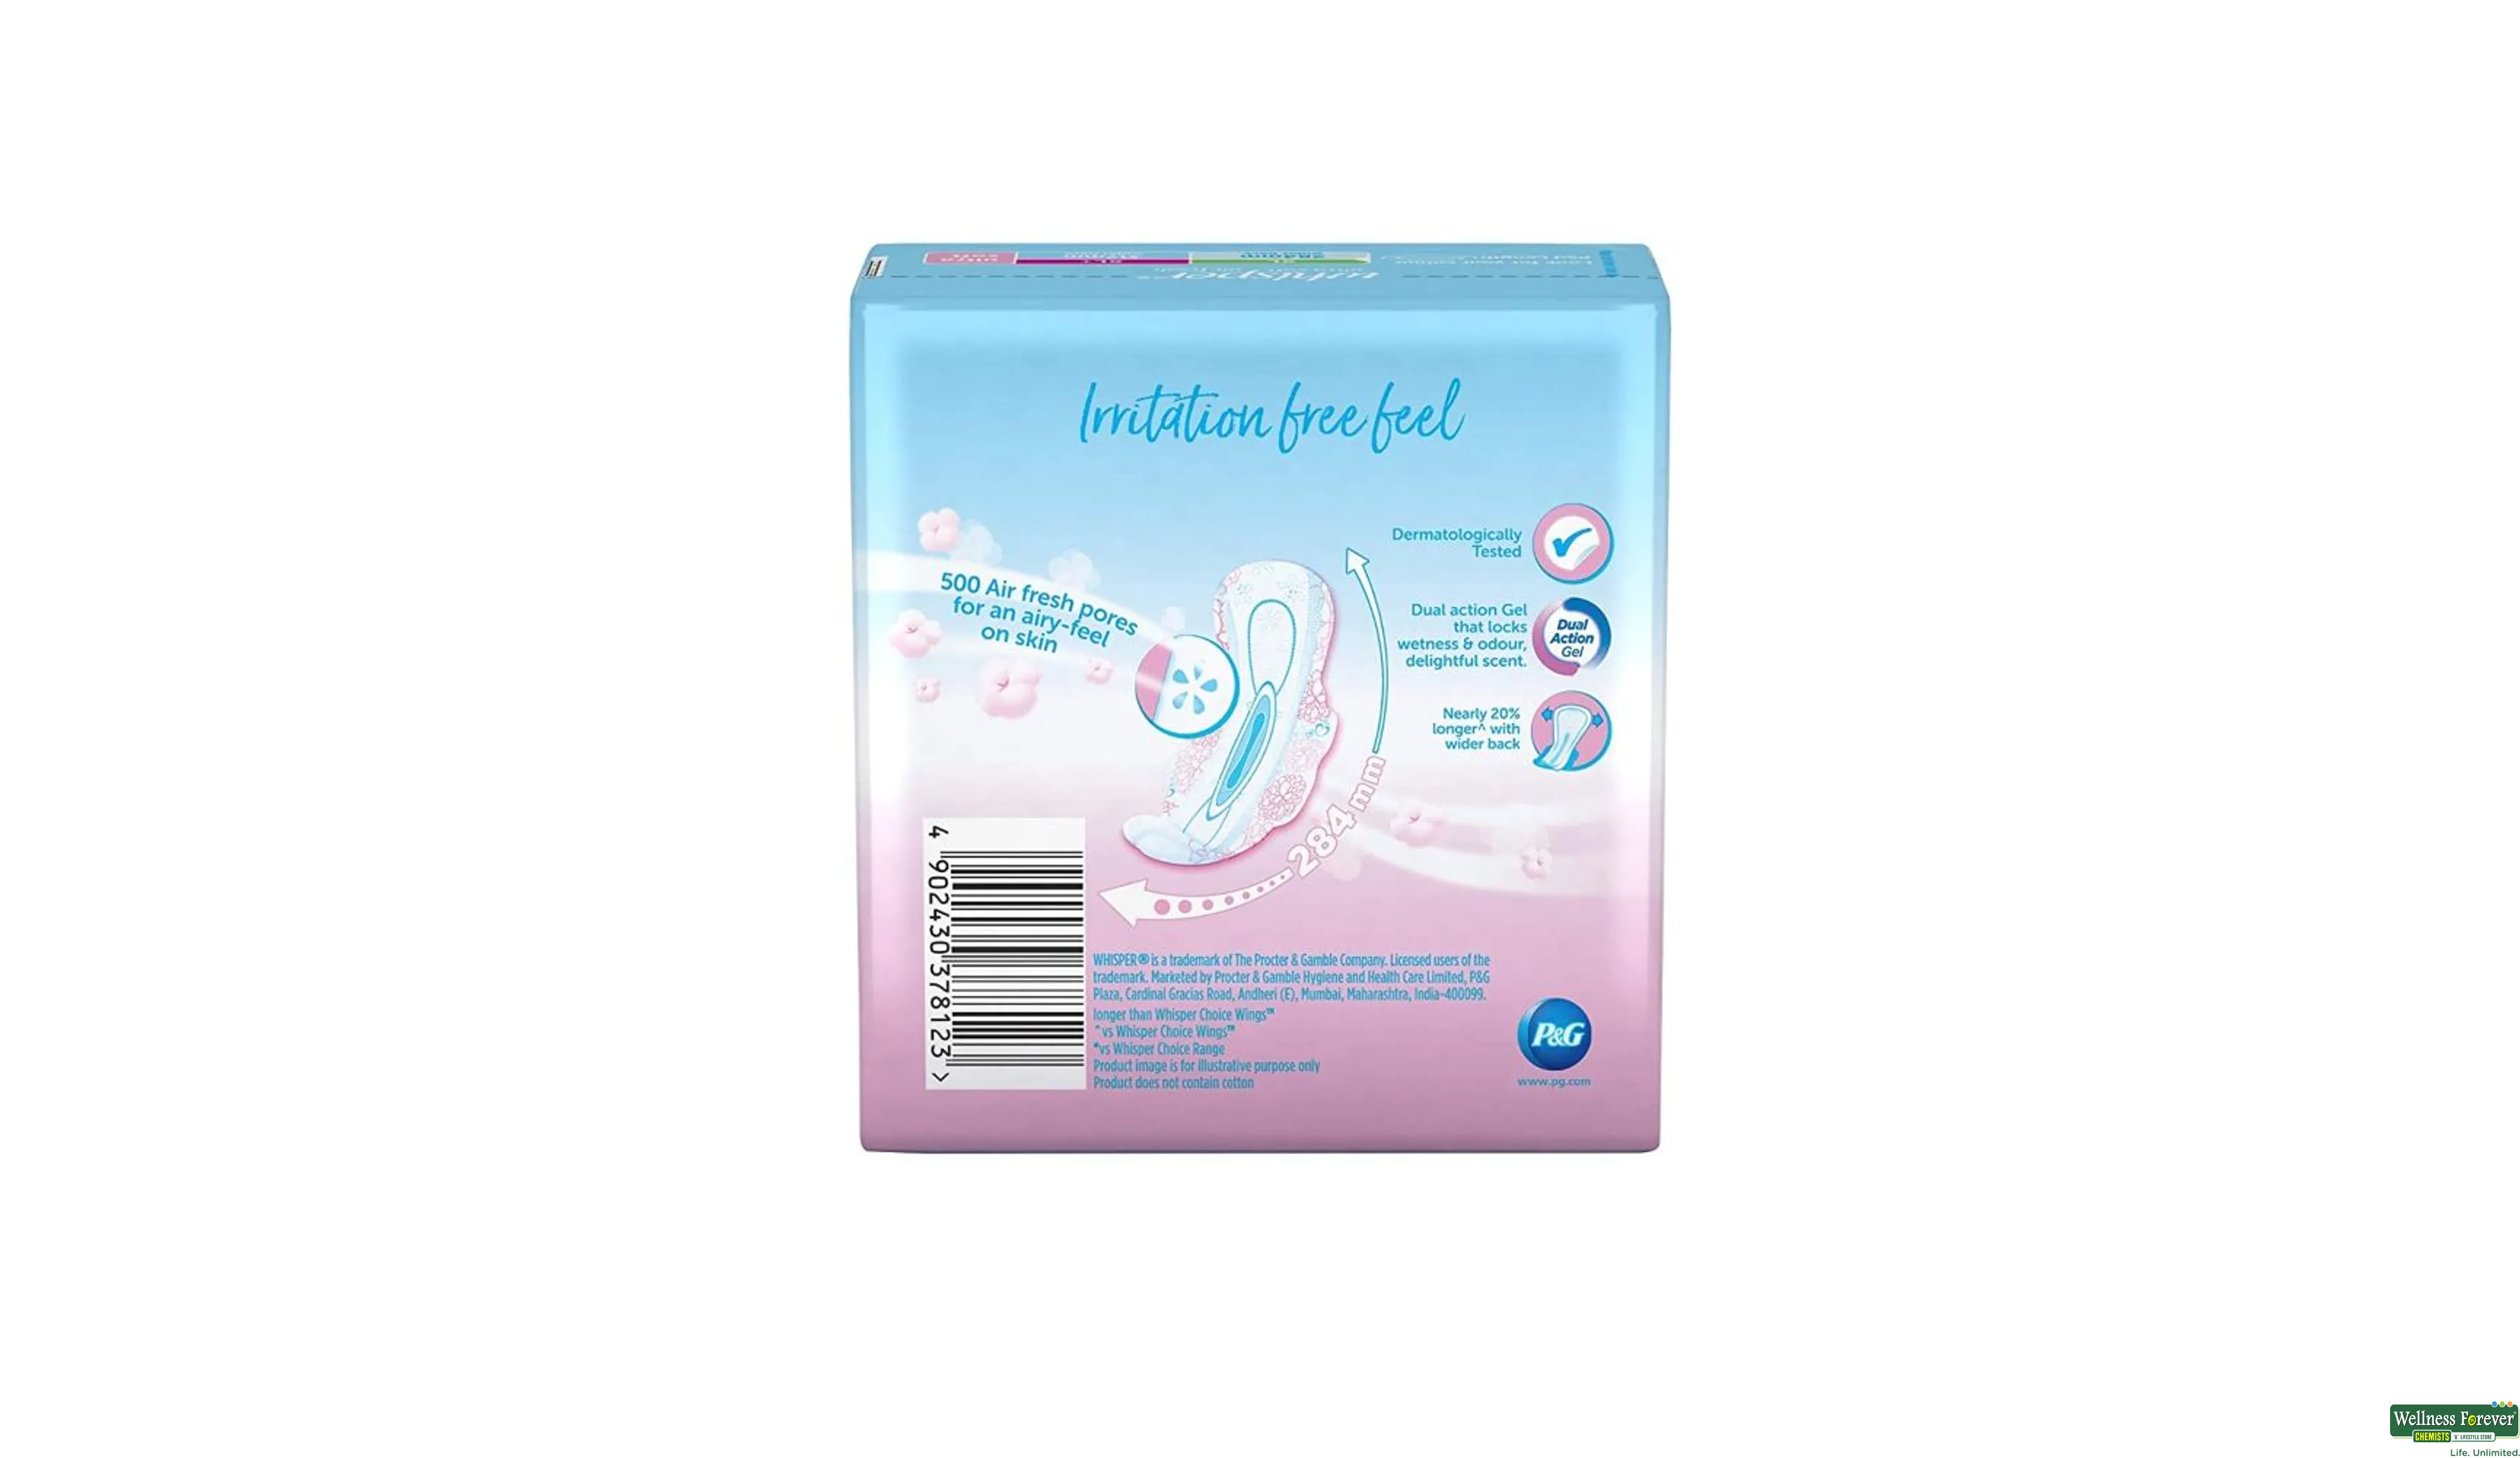 Whisper Ultra Soft Sanitary Pads - 50 Pieces (XL)